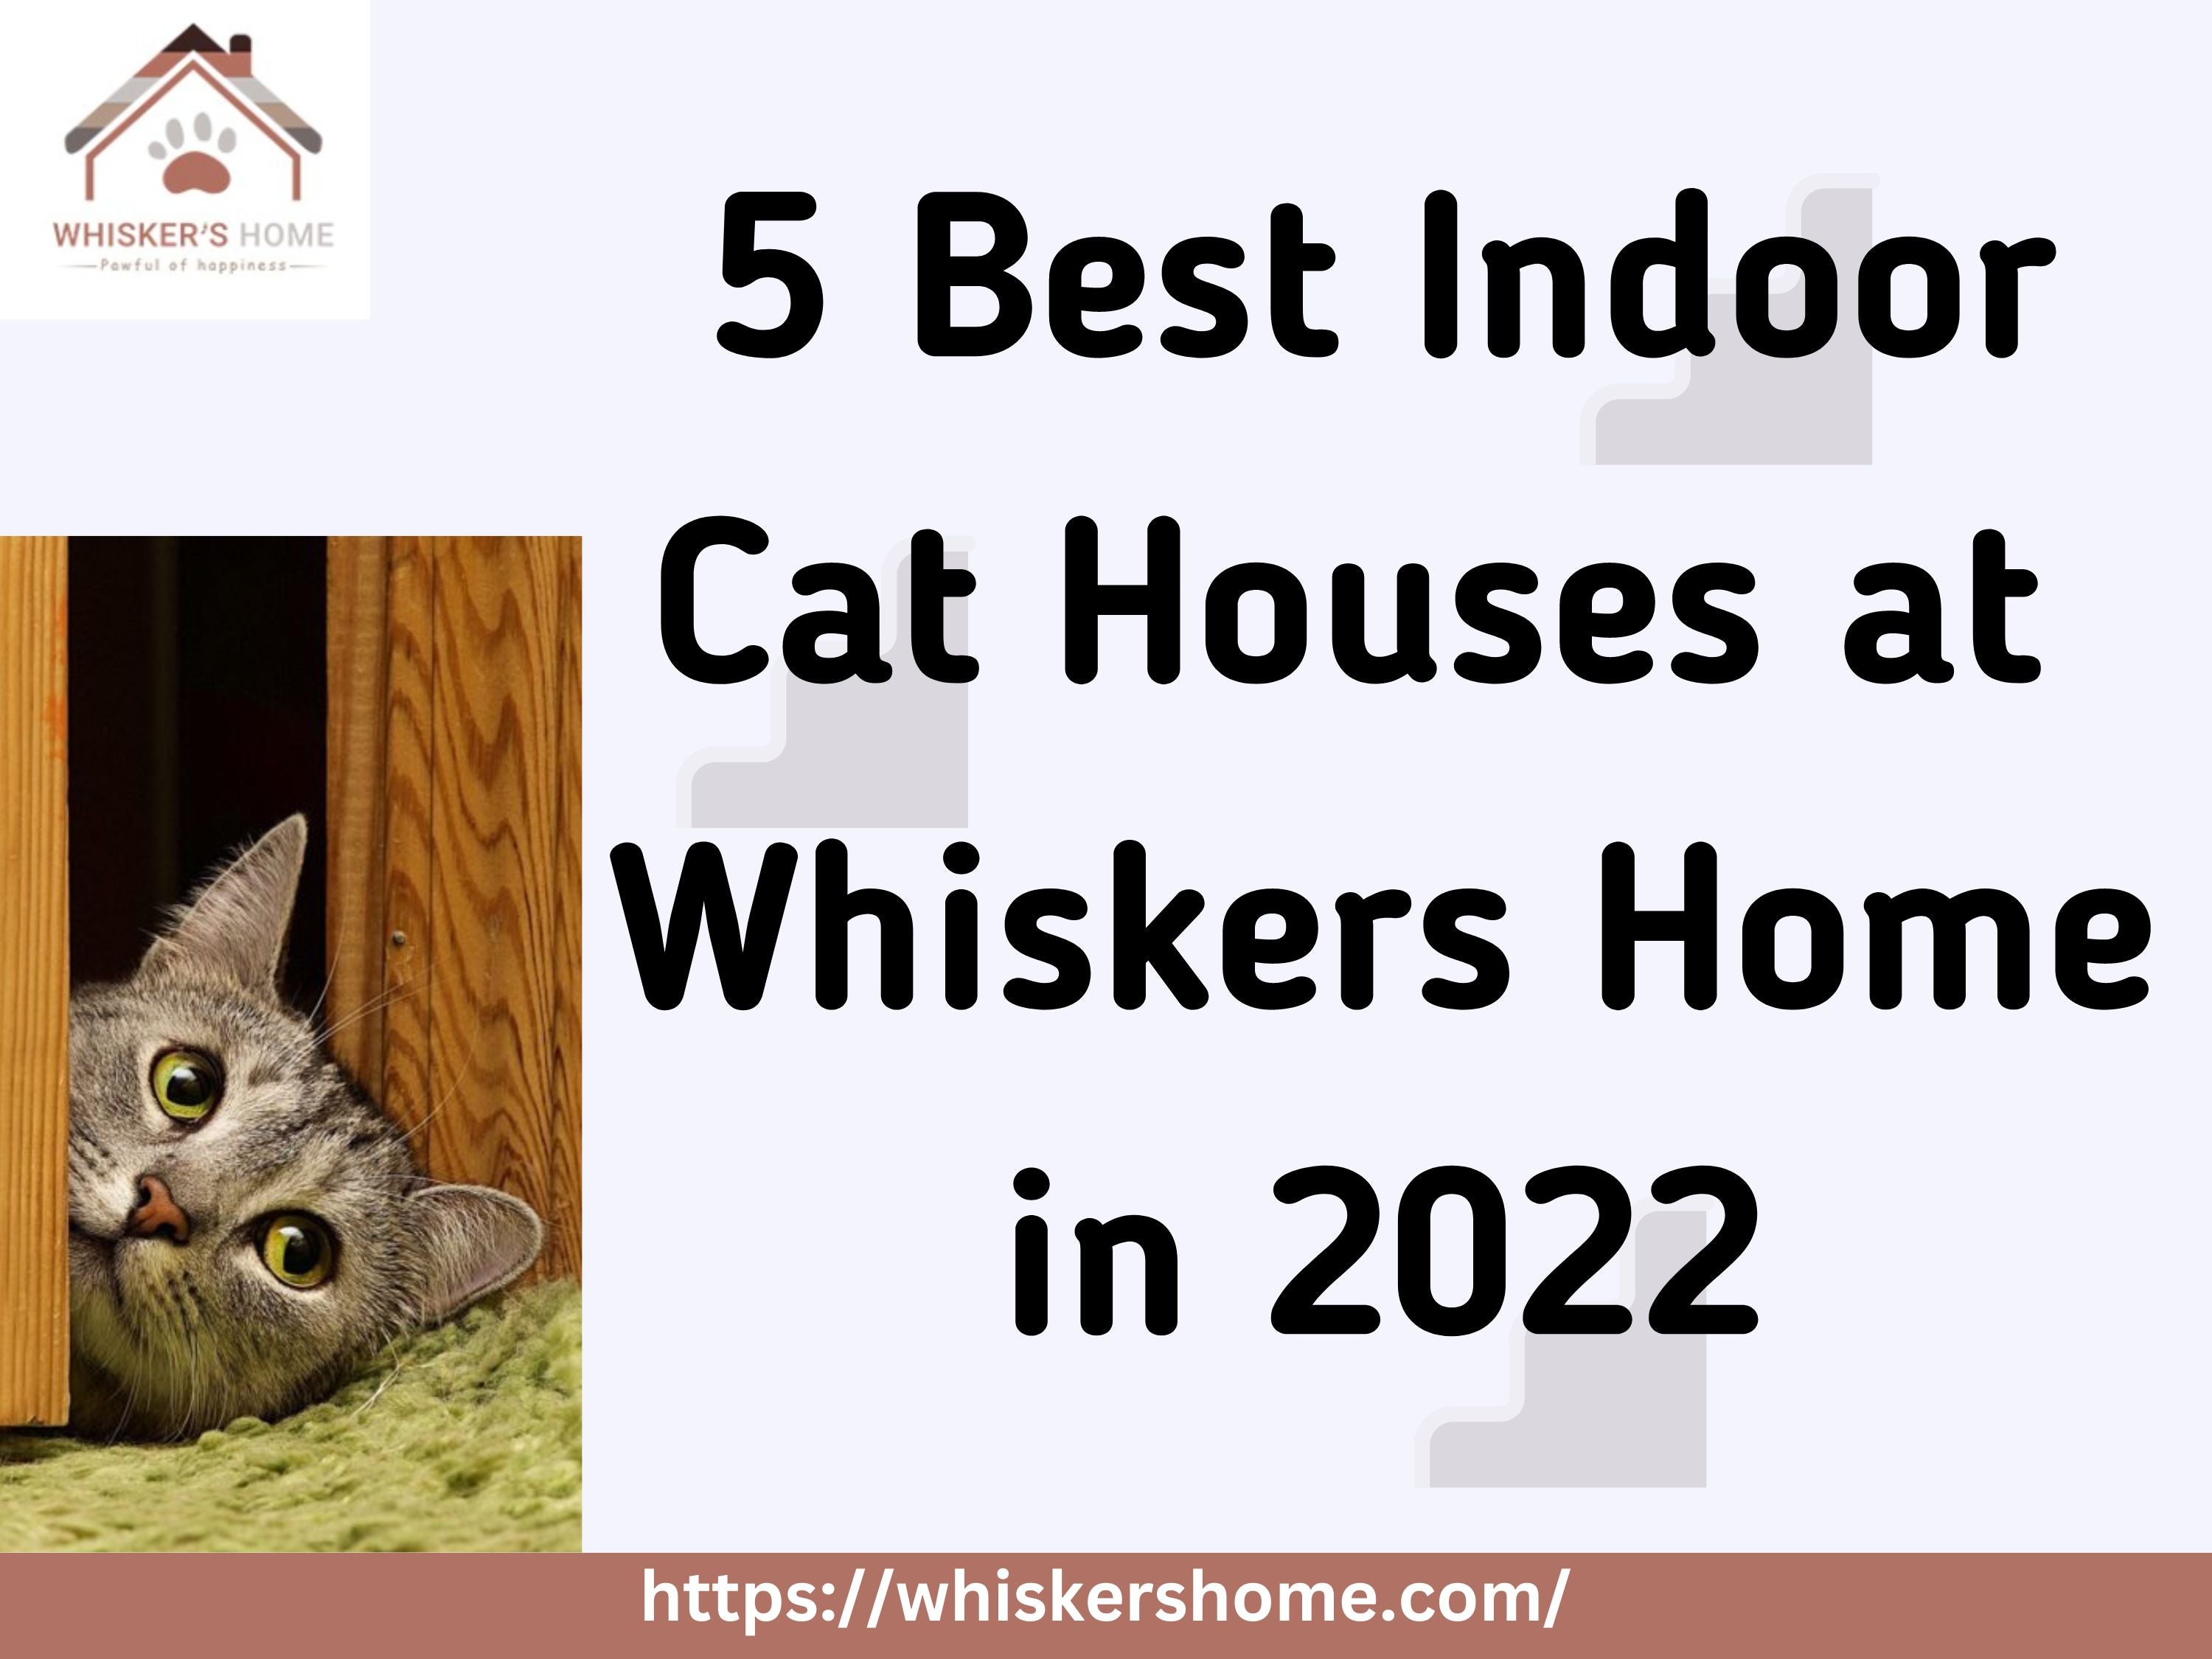 5 Best Indoor Cat House at Whiskers Home in 2022